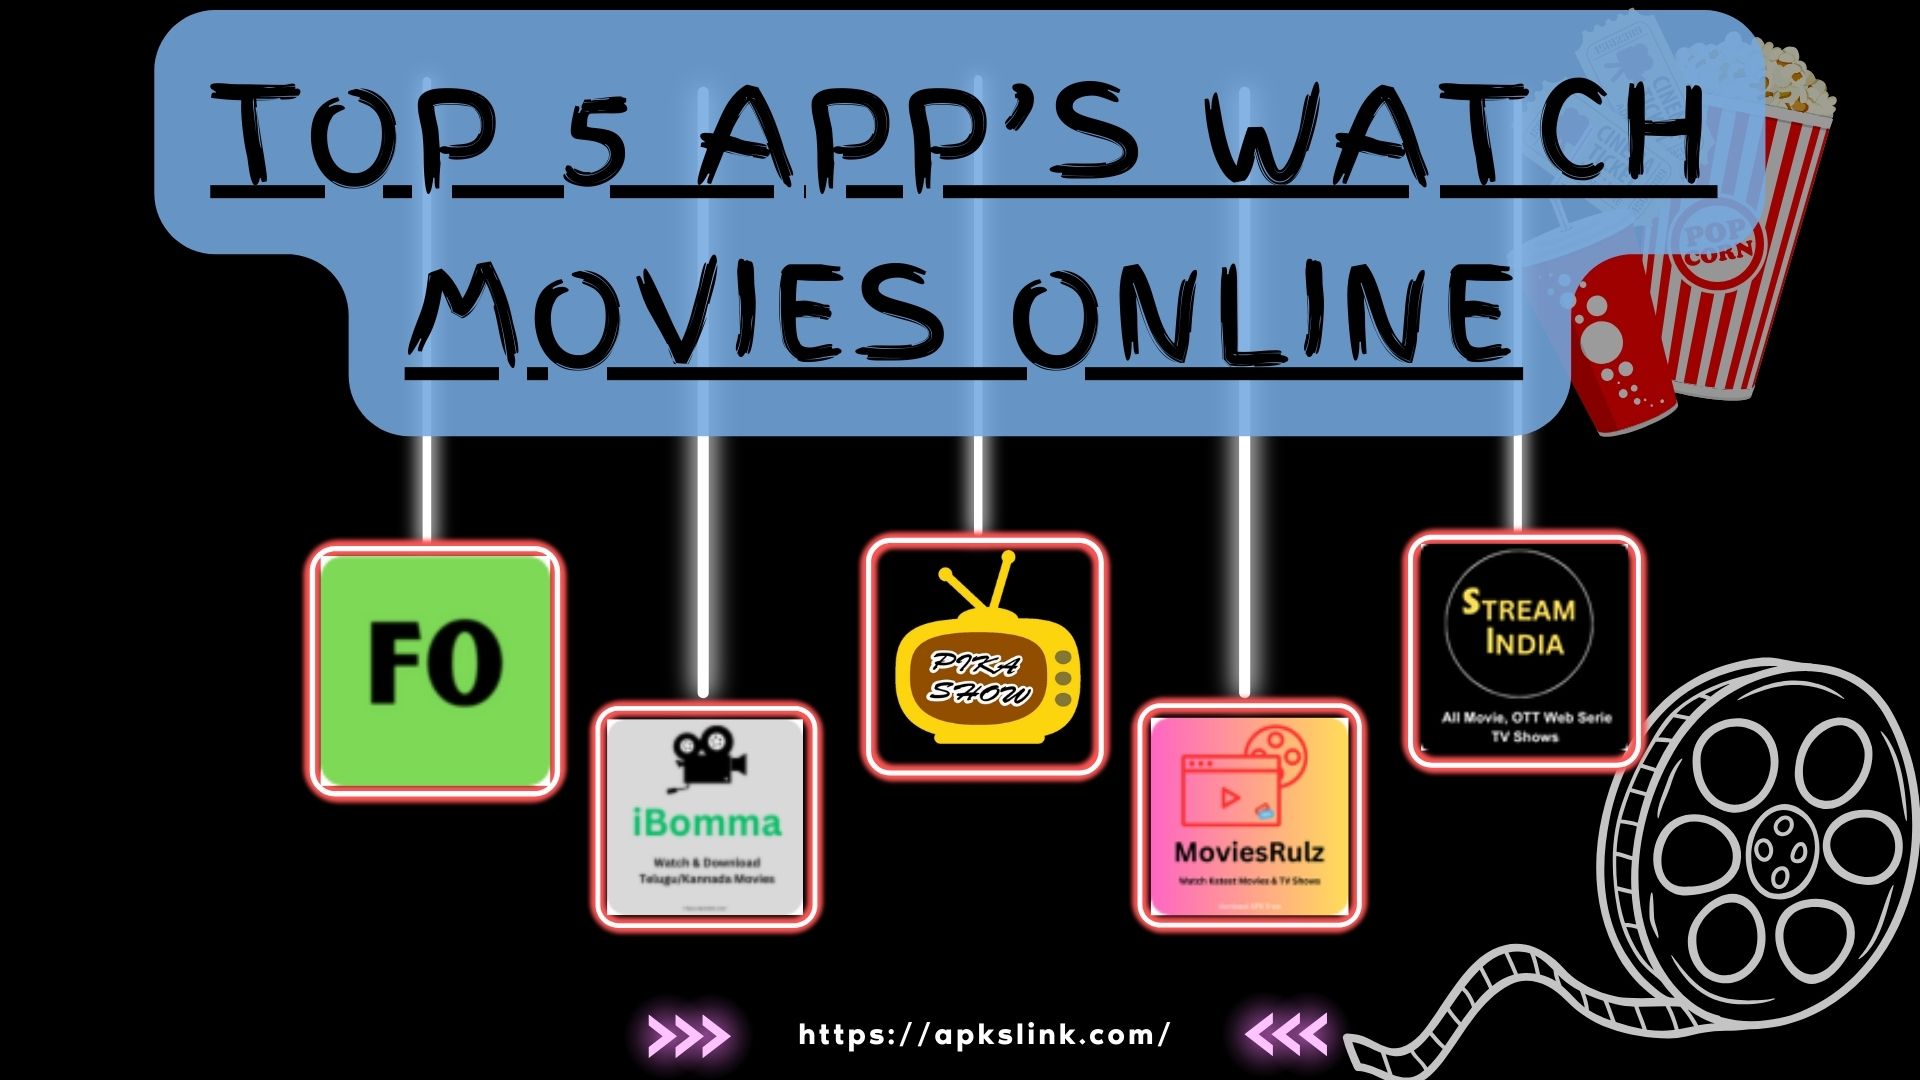 Top 5 Free applications to watch movies online – Pikashow APK